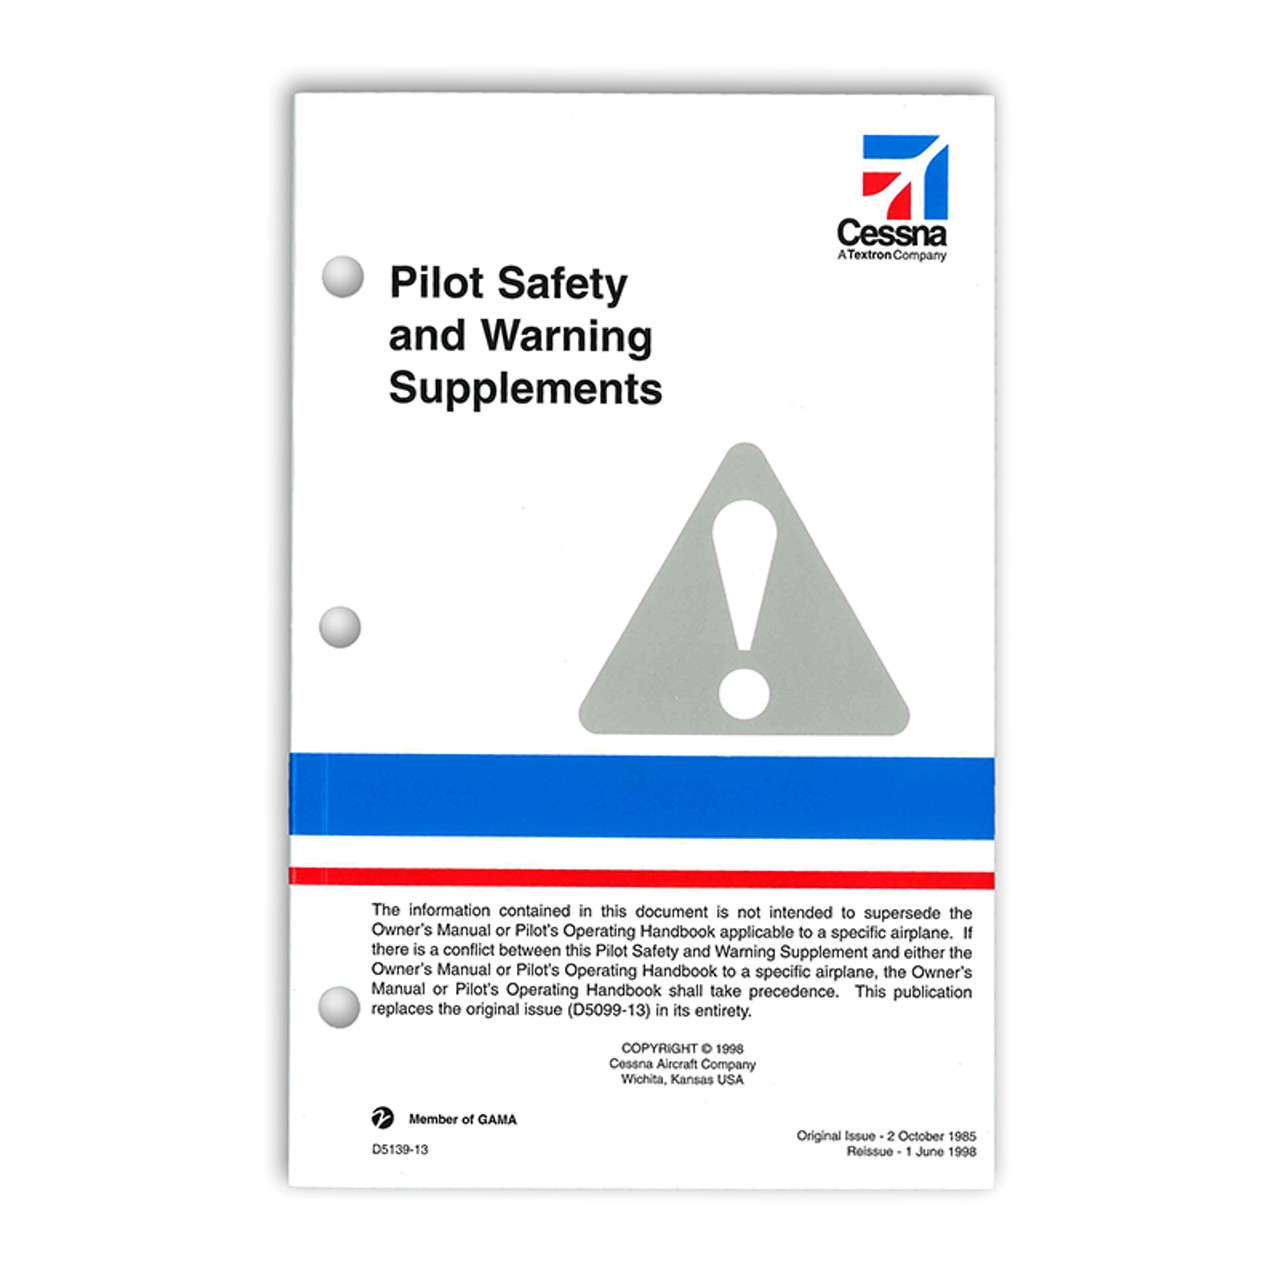 Pilot Safety and Warning Supplements